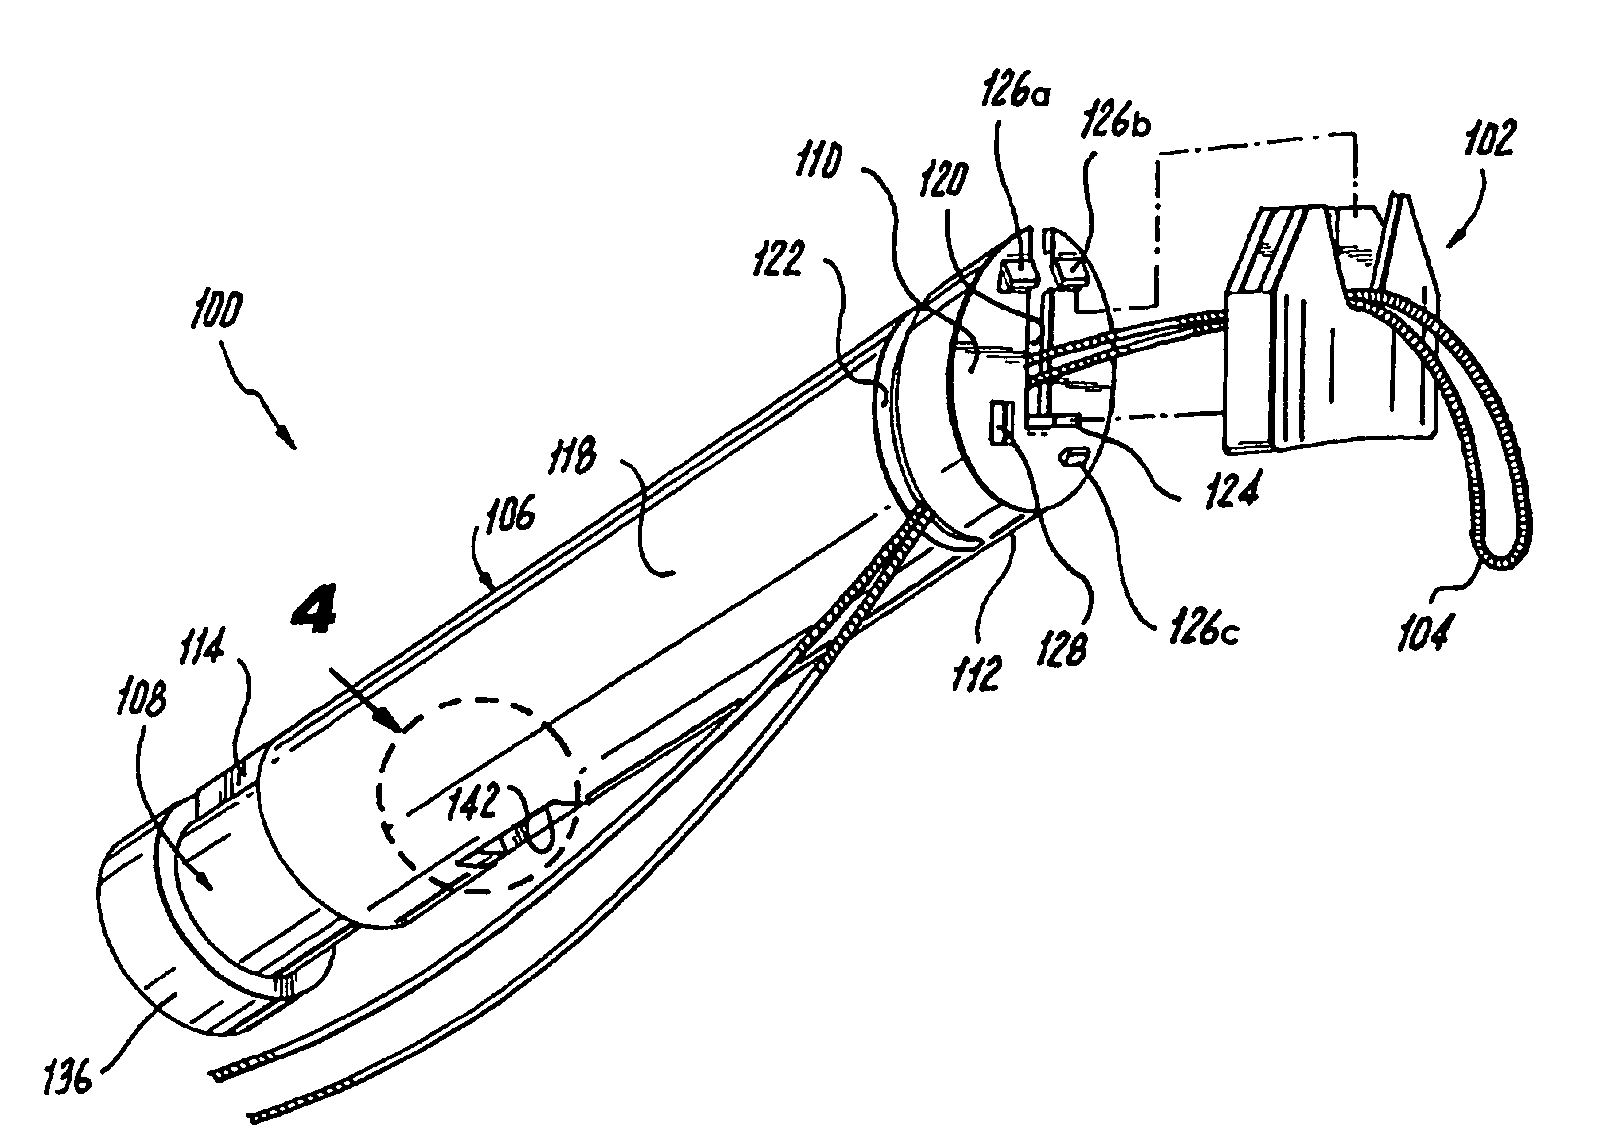 System for securing a suture